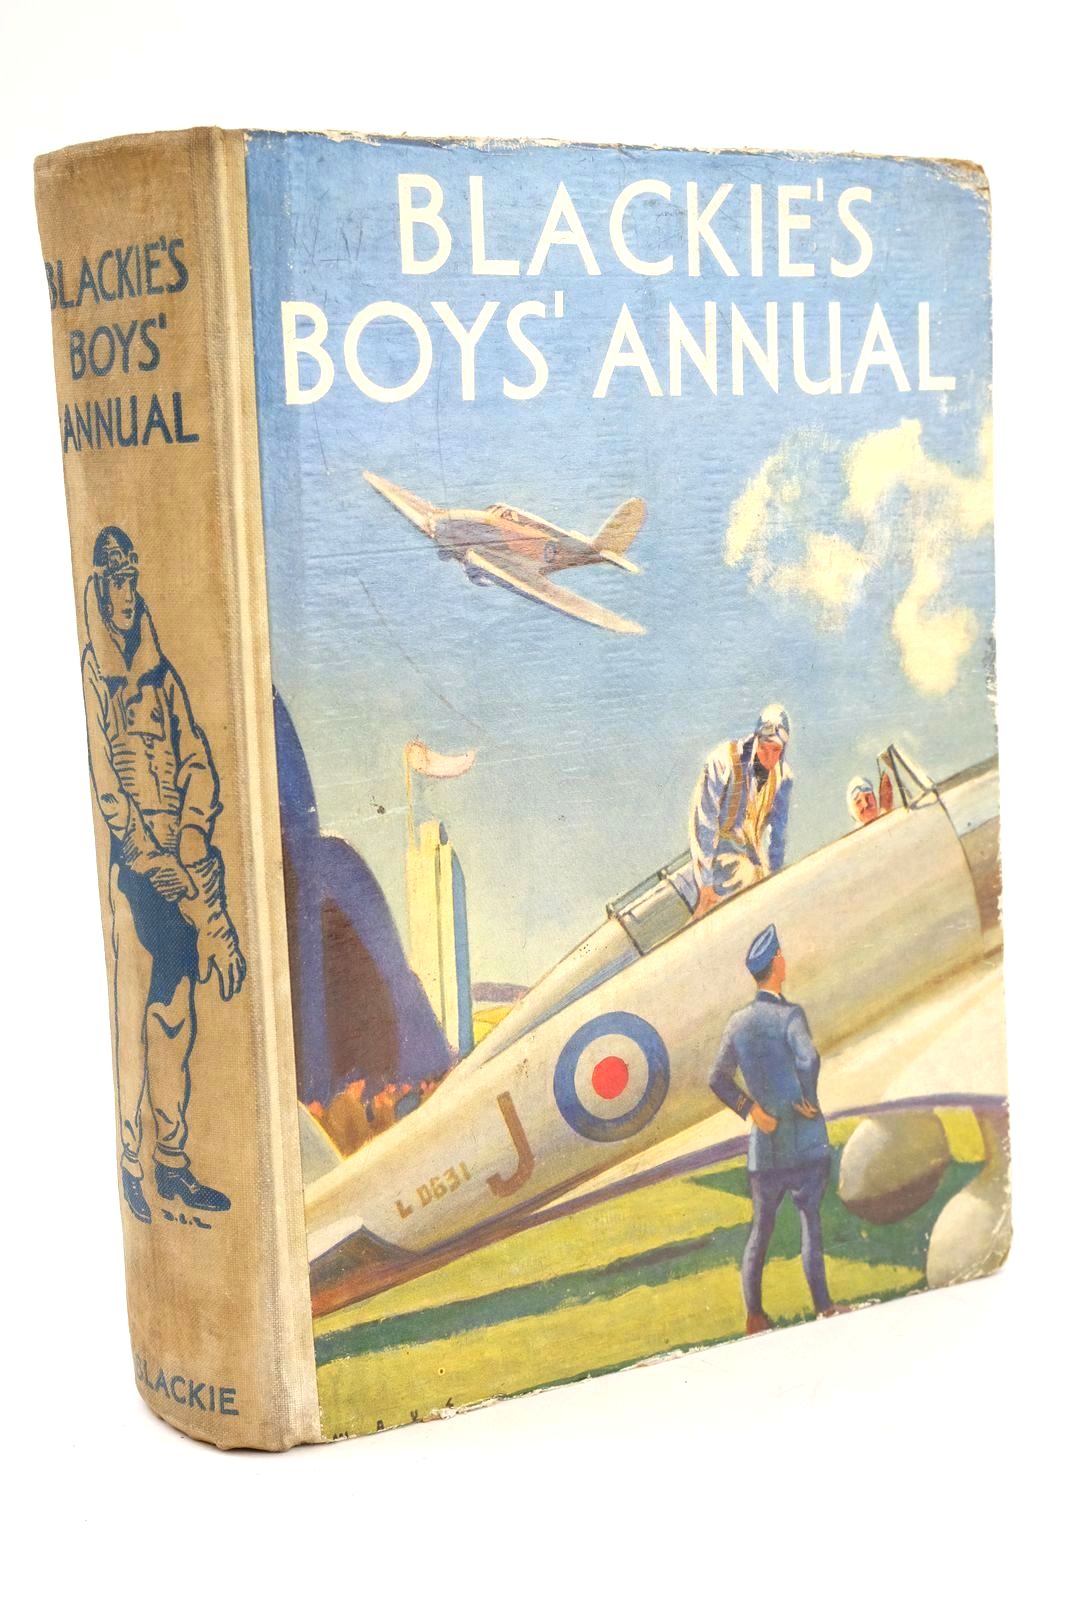 Photo of BLACKIE'S BOYS' ANNUAL written by Gilson, Charles Westerman, Percy F. et al, illustrated by Mays, D.L. Cuneo, Terence et al., published by Blackie &amp; Son Ltd. (STOCK CODE: 1324777)  for sale by Stella & Rose's Books